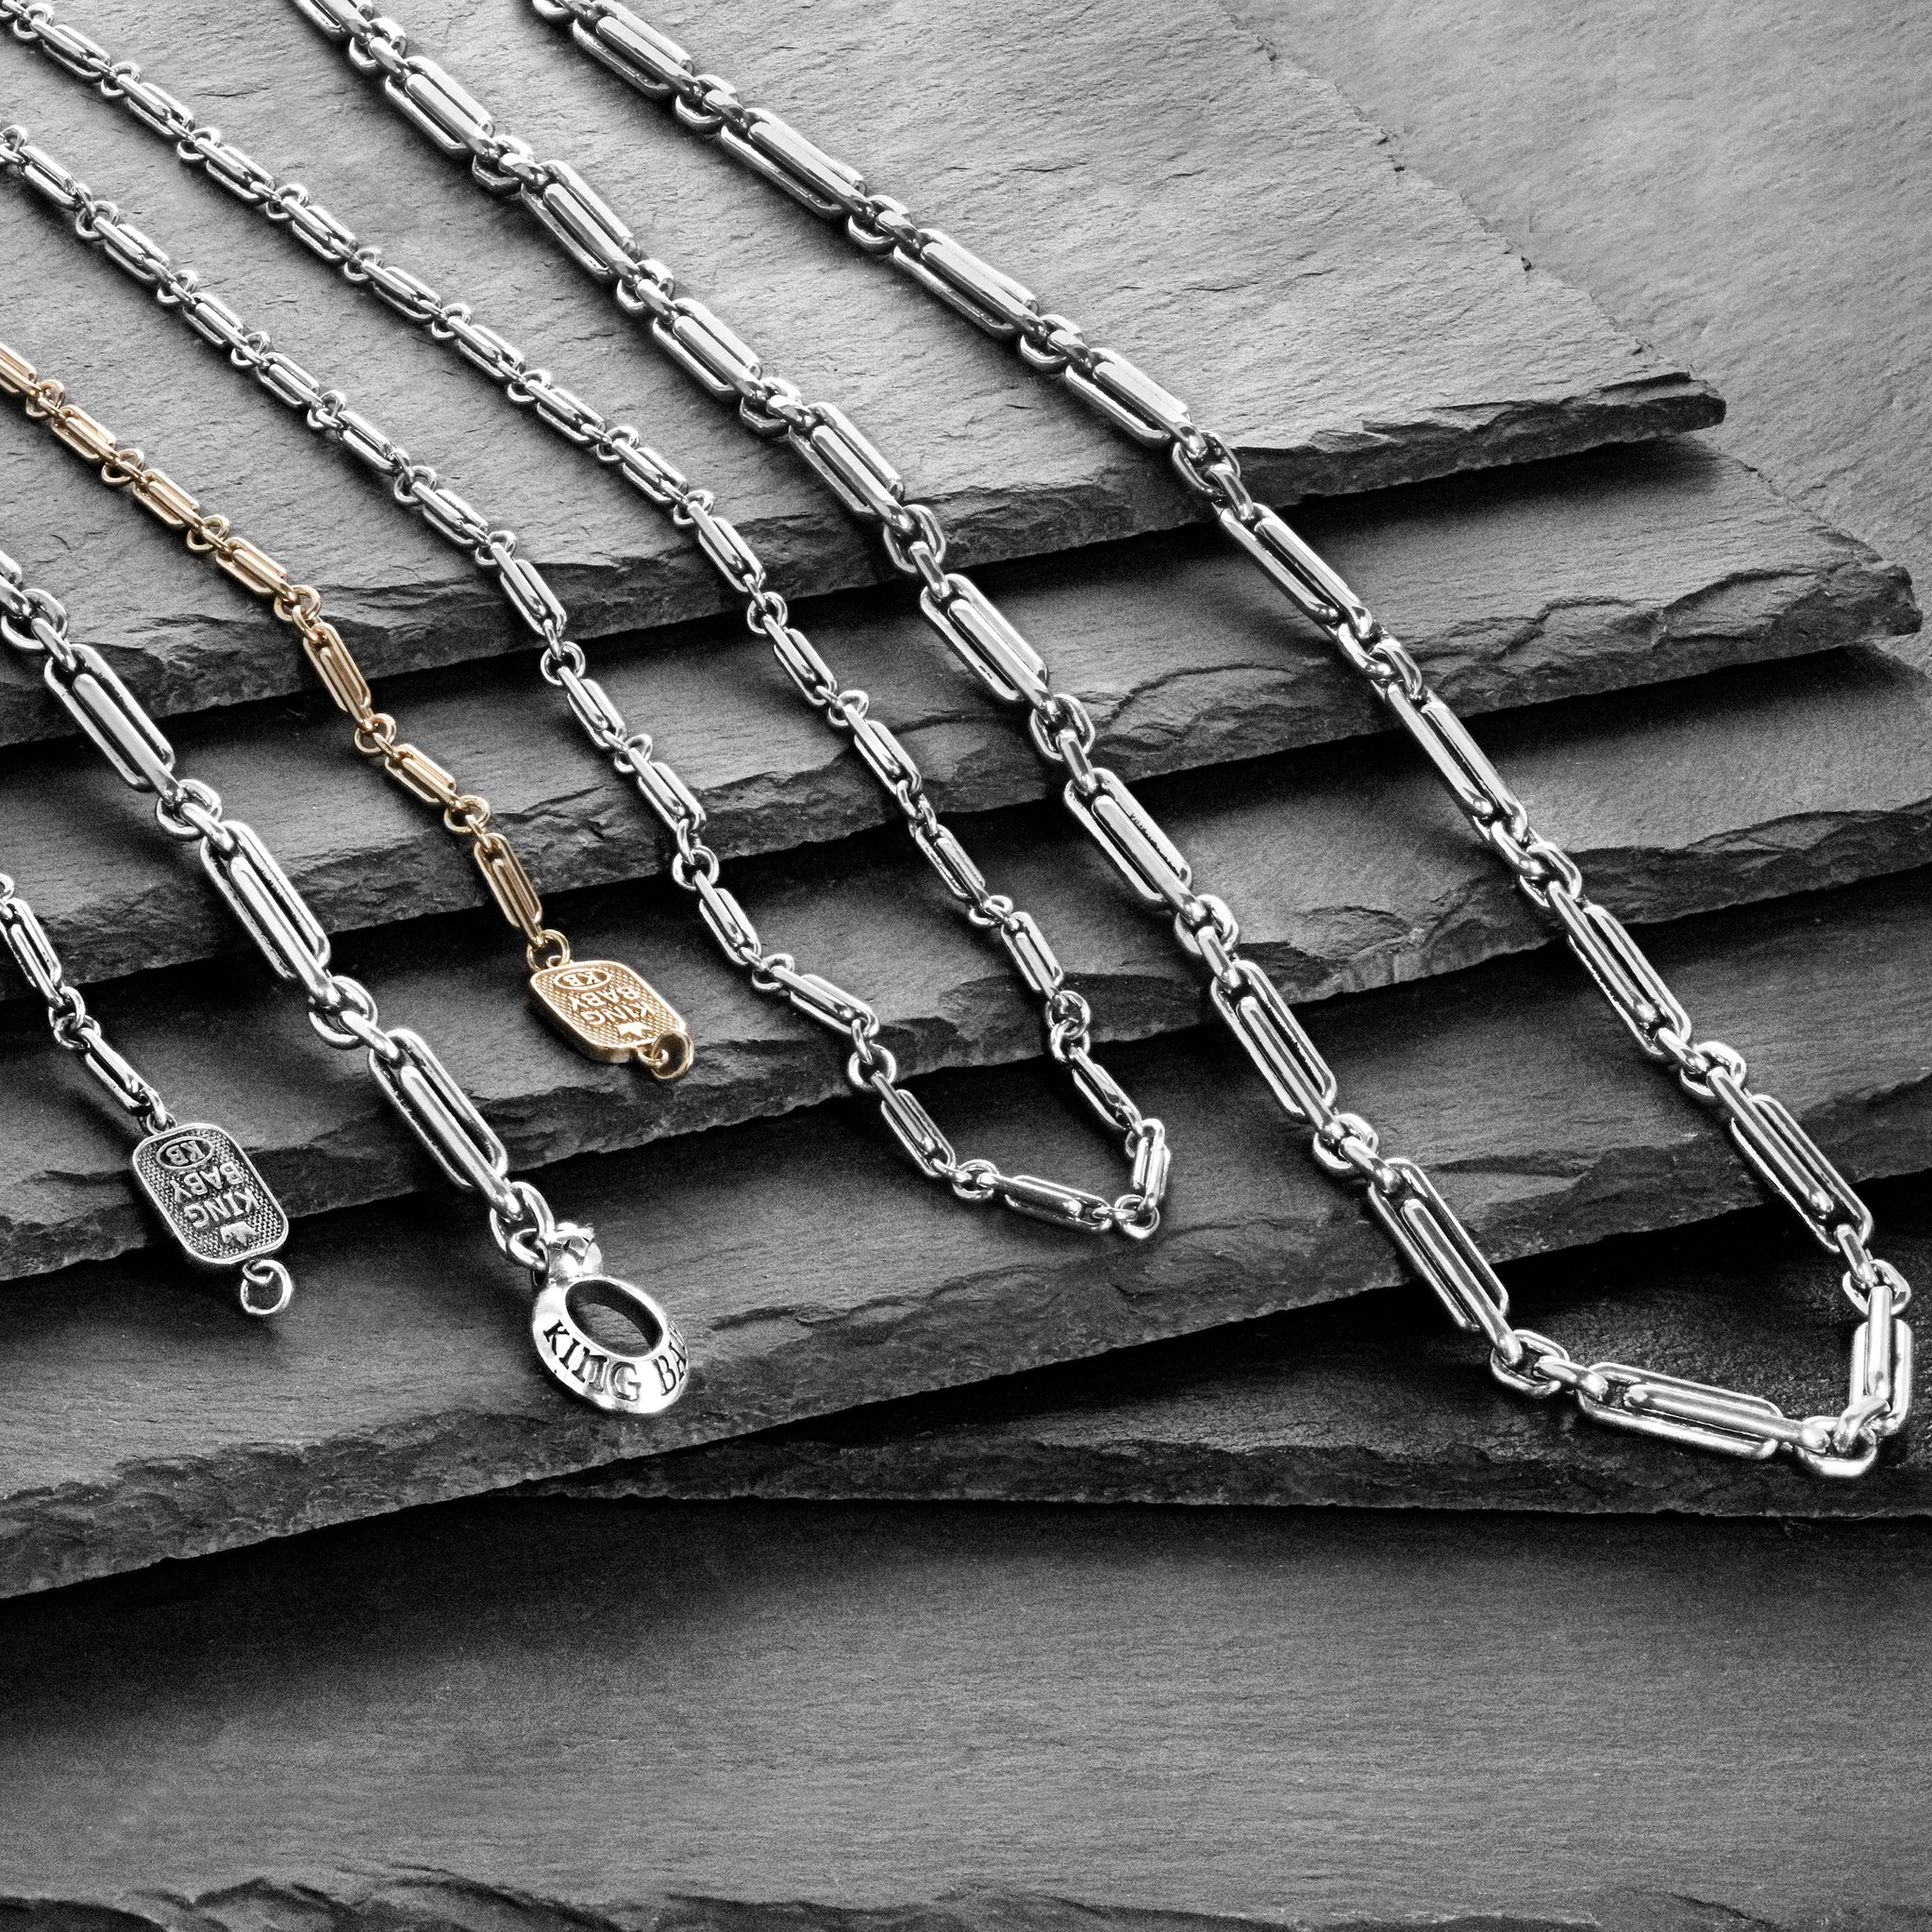 The Paperclip collection necklaces and bracelets cascading down multiple slate slabs.